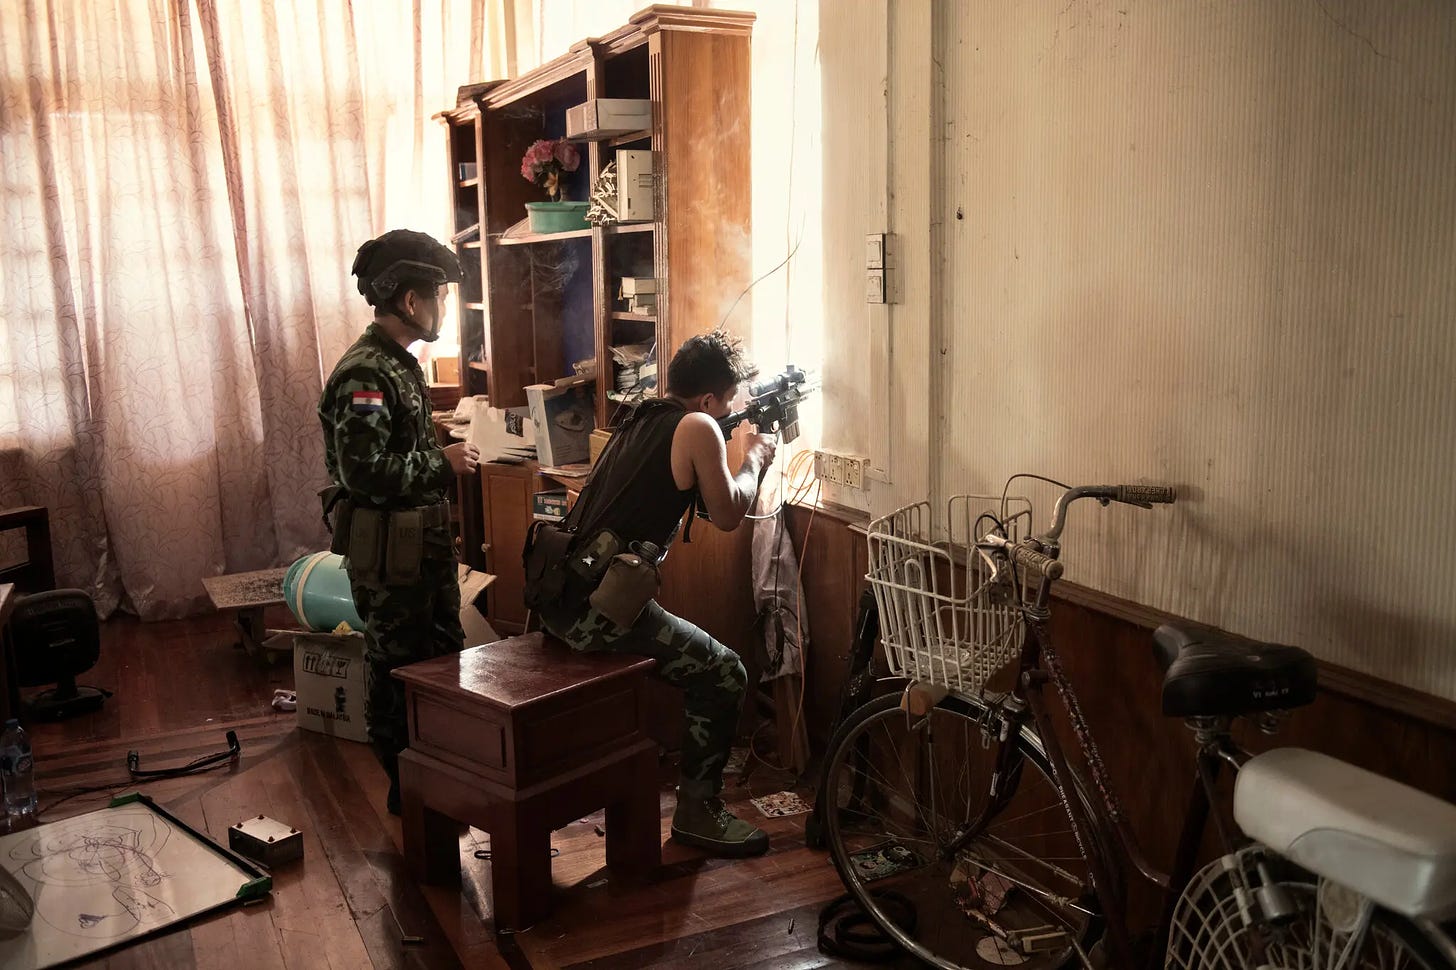 Outposts from the Karenni Nationalities Defense Force’s soldiers. Credit: New York Times